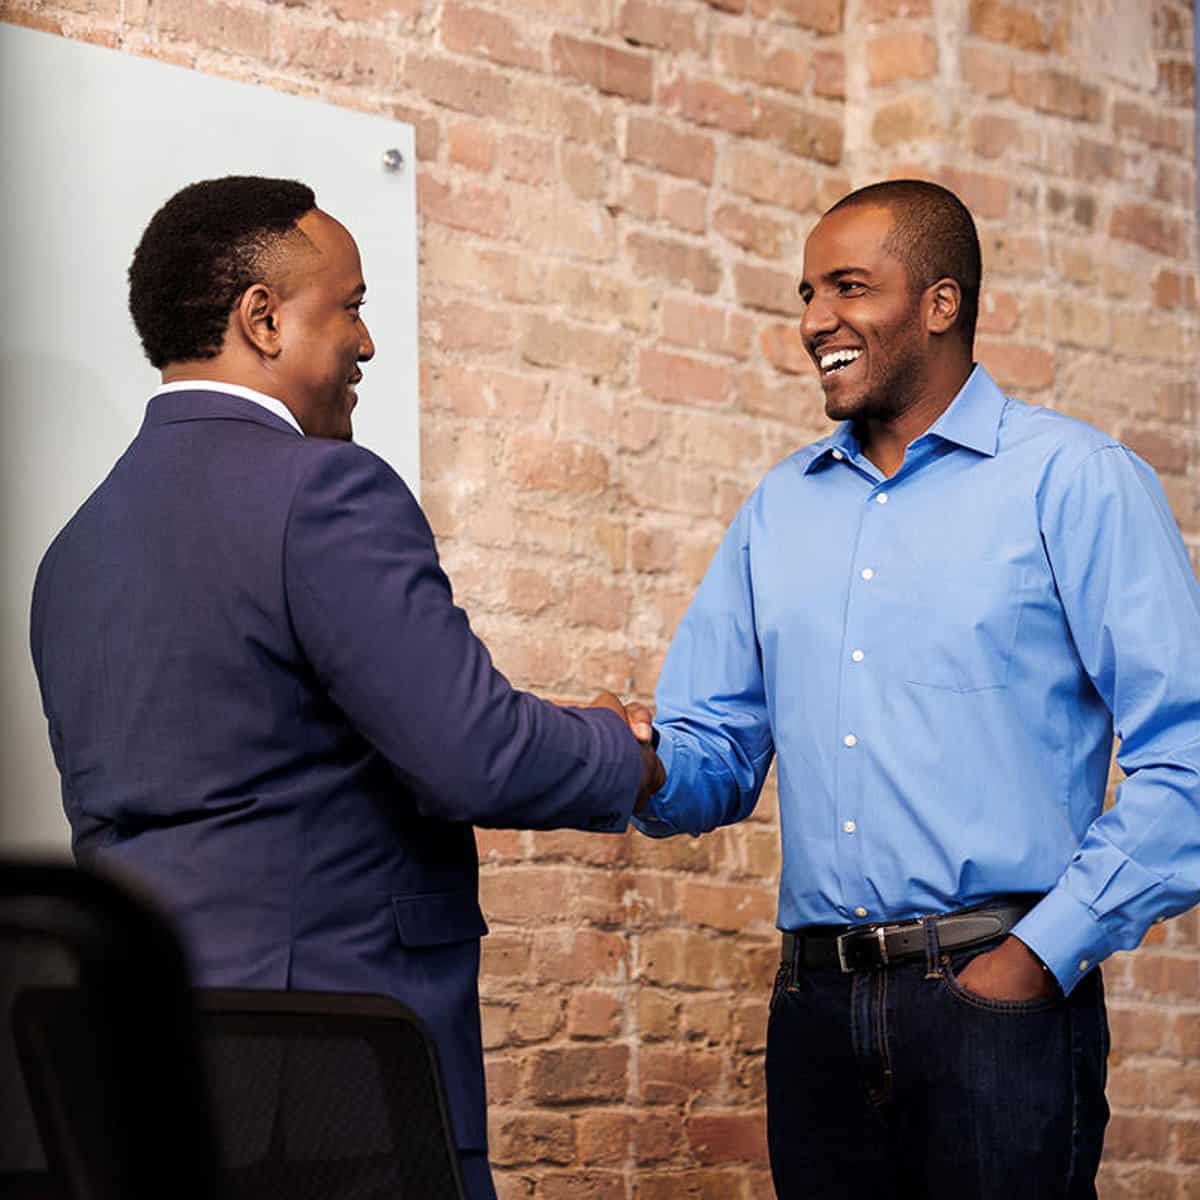 Chicago commercial photography featuring a corporate branding phot of two men shaking hands in front of a brick wall.